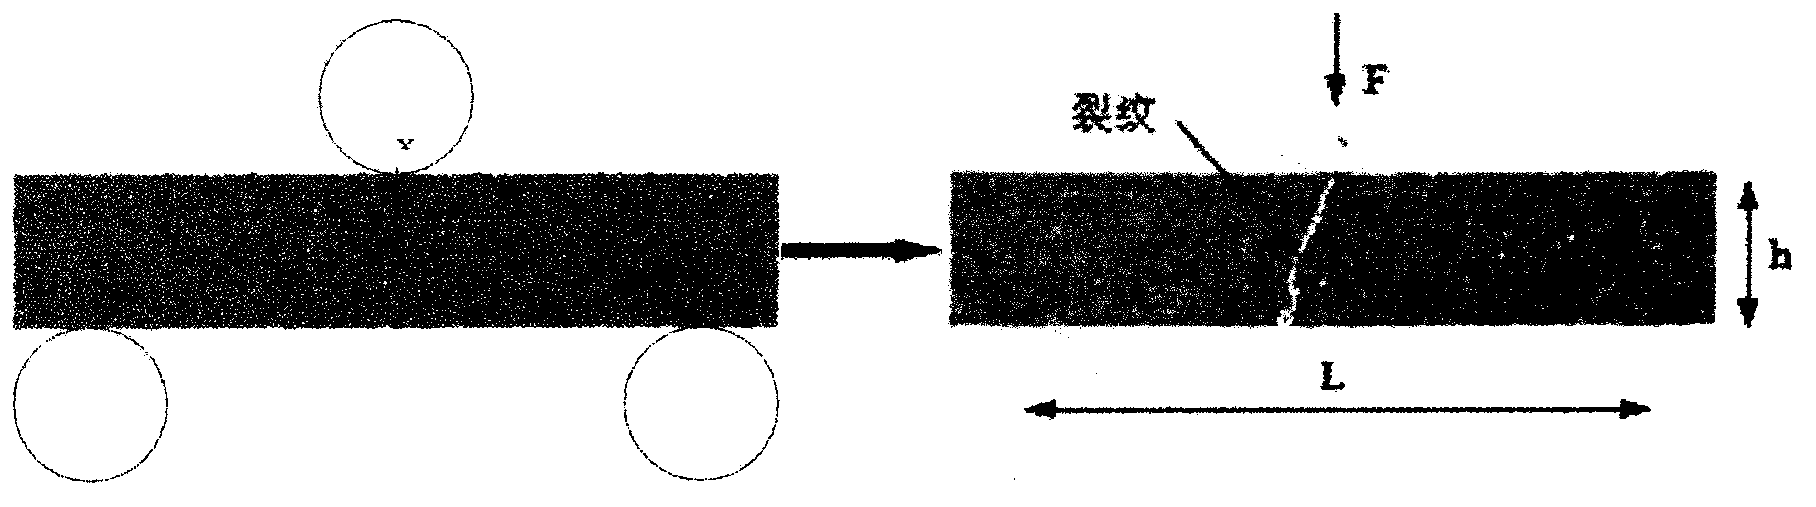 Discrete element analysis method for propagation and damage of coating crack in cutting process of coated cutting tool